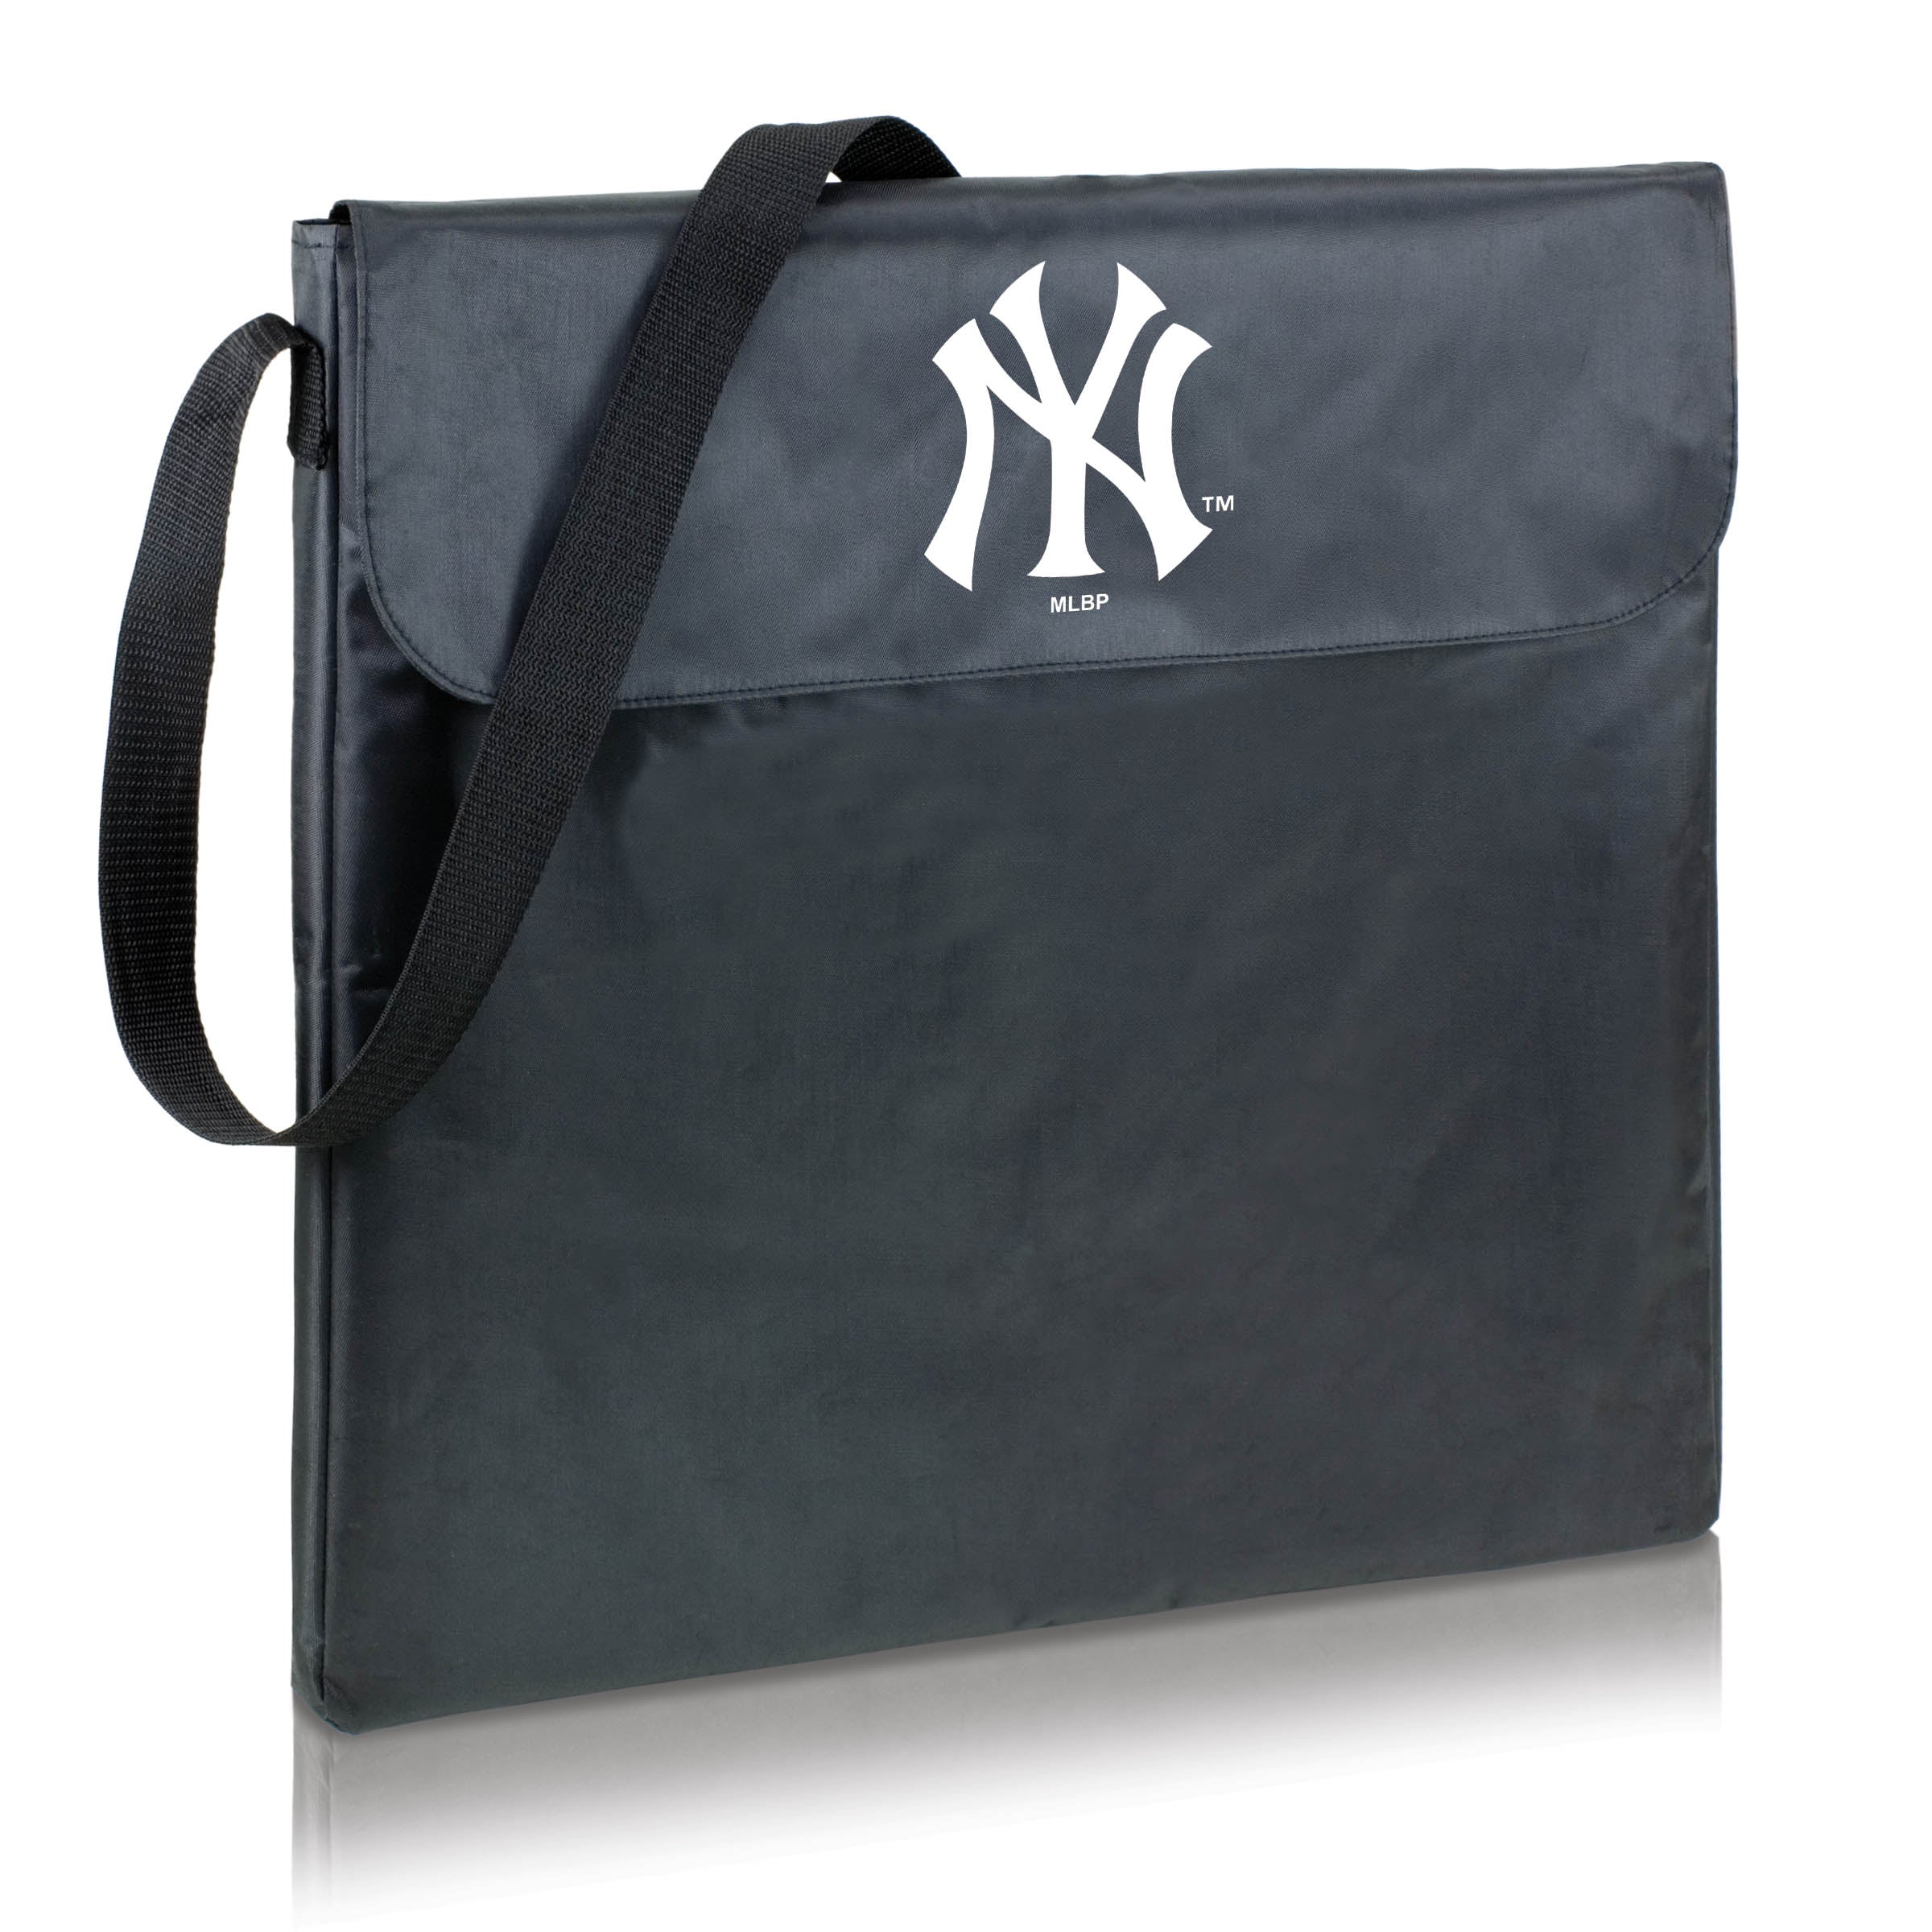 New York Yankees - X-Grill Portable Charcoal BBQ Grill